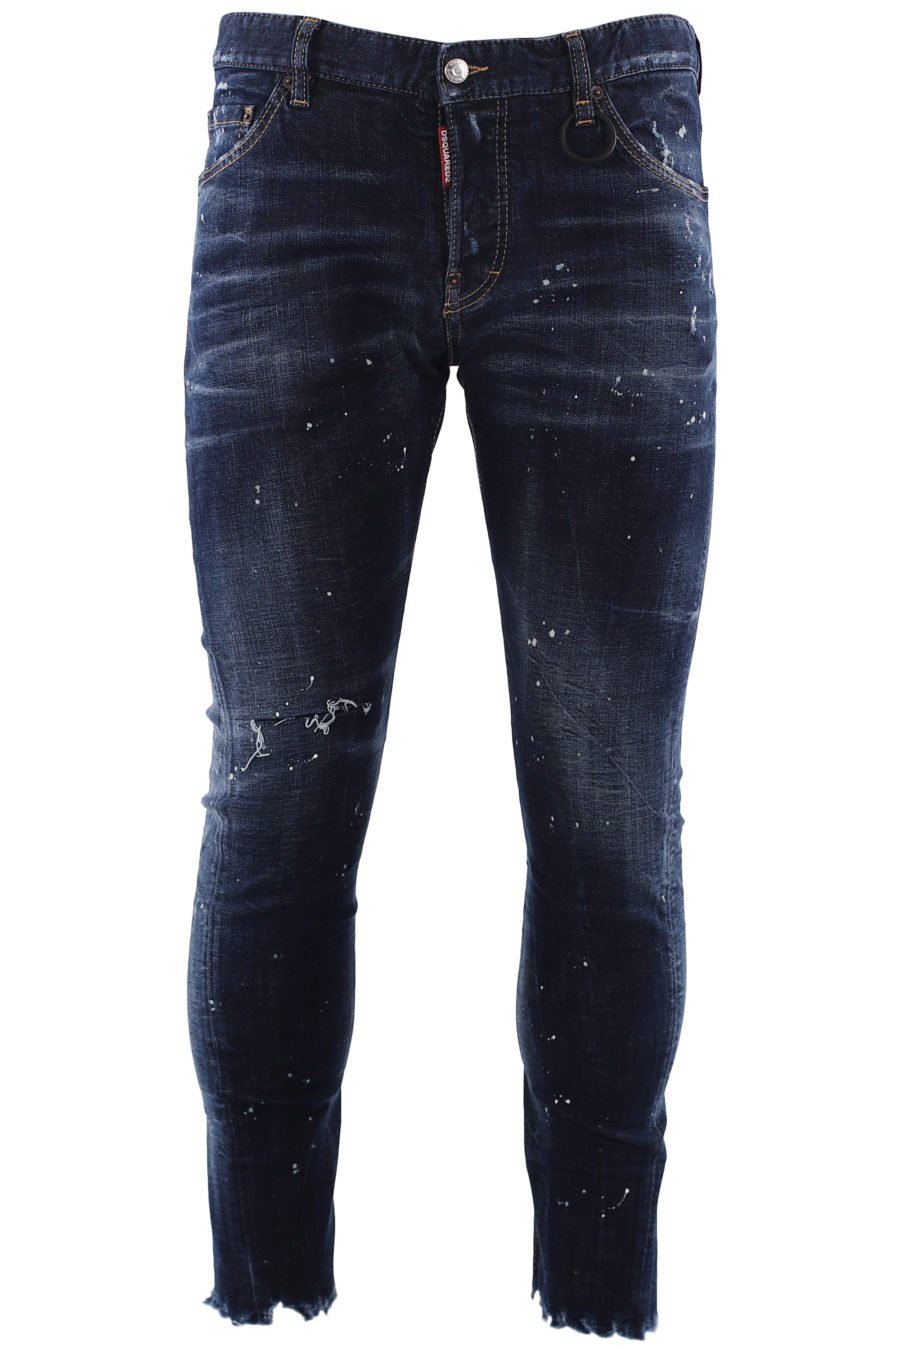 Jeans "sexy twist jean" dark blue with white paint - IMG 6691